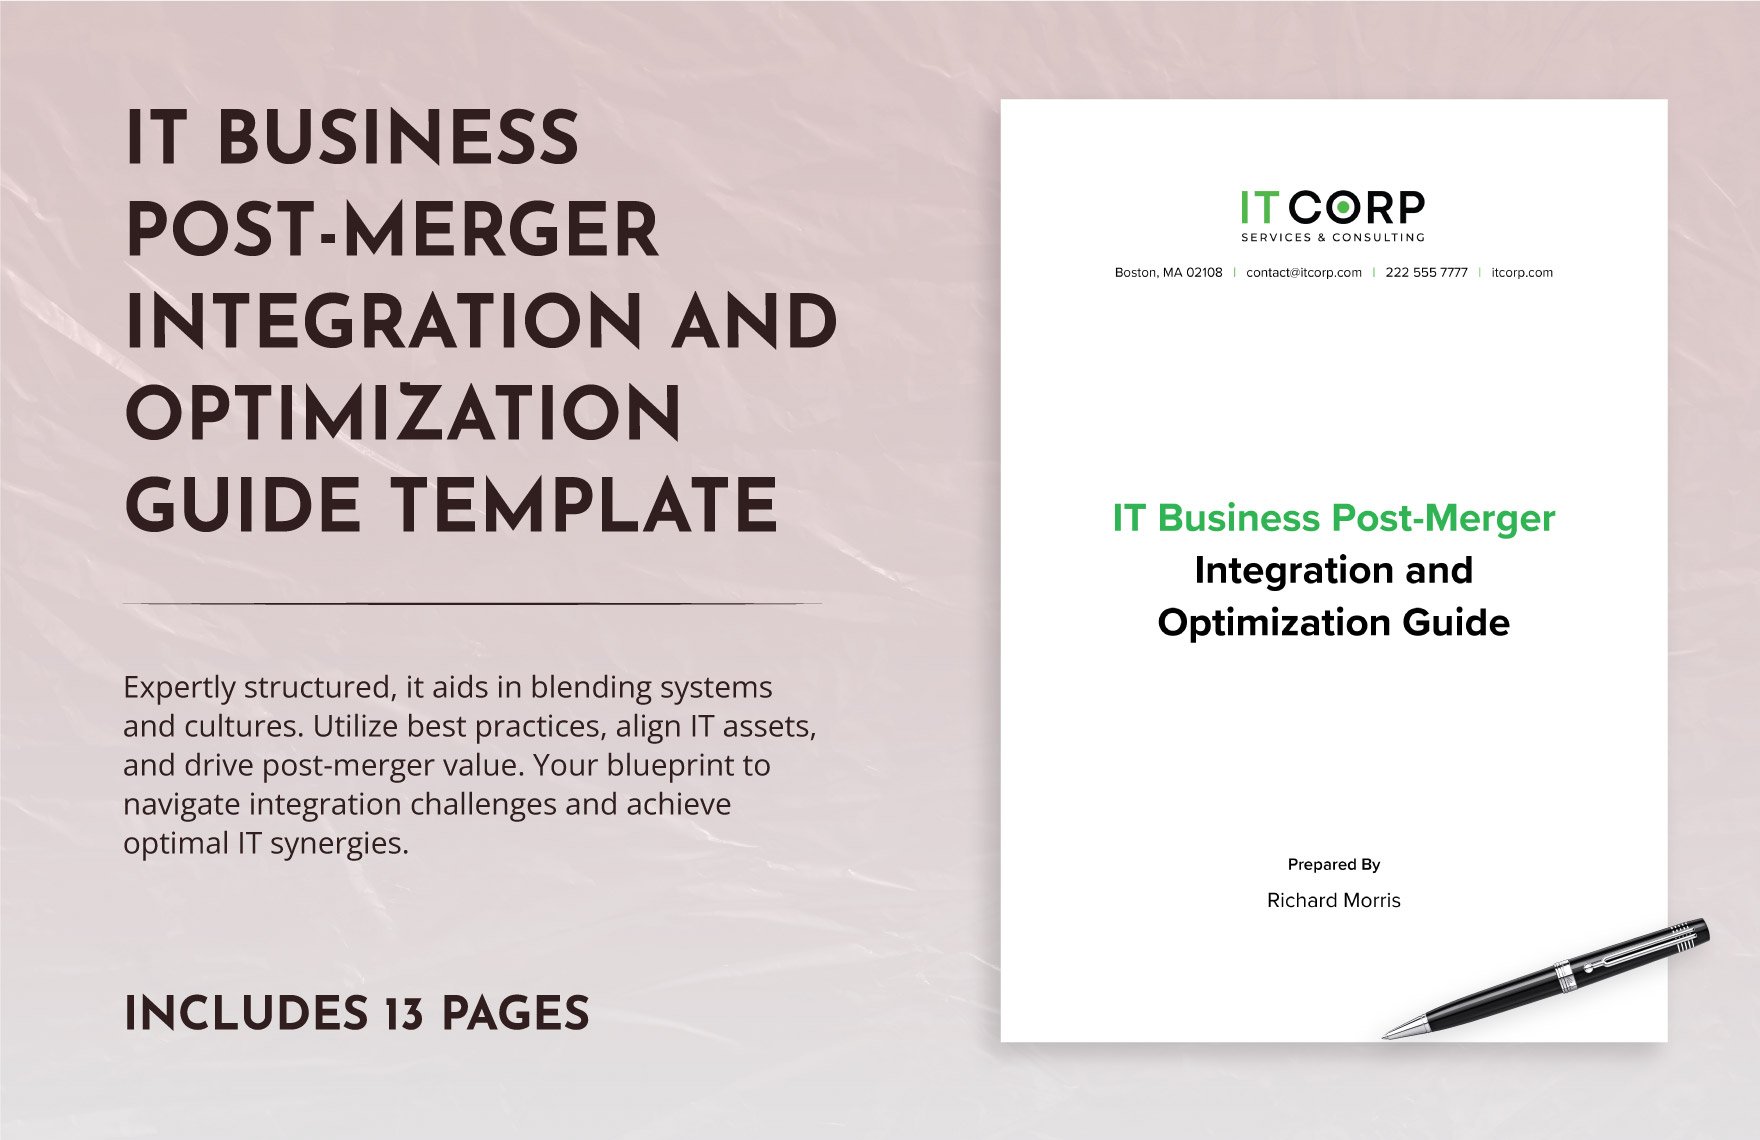 IT Business Post-Merger Integration and Optimization Guide Template